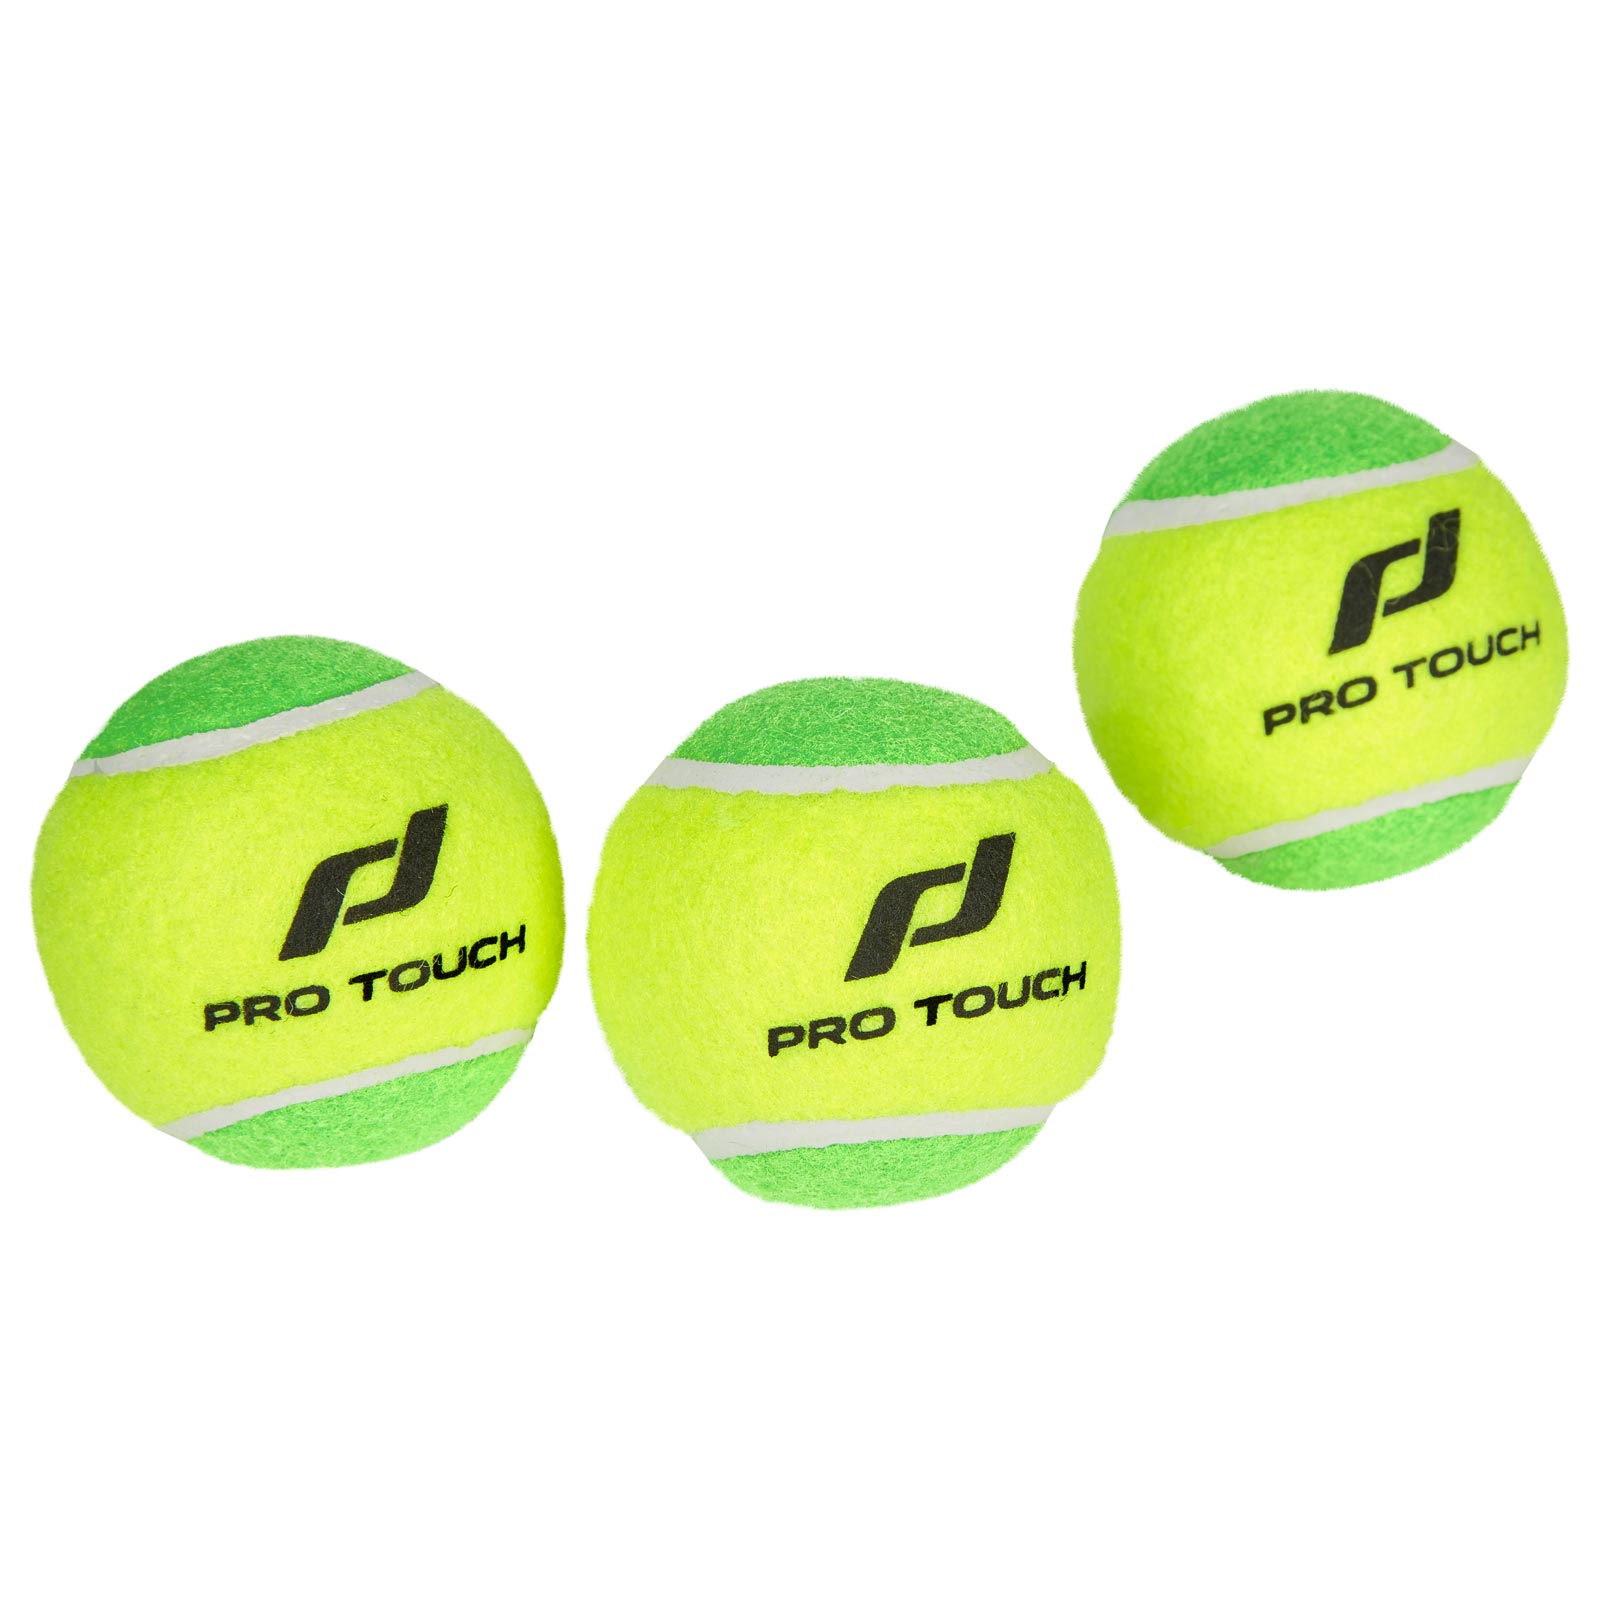 PRO TOUCH ACE 1 TENNIS BALLS - 3 PACK